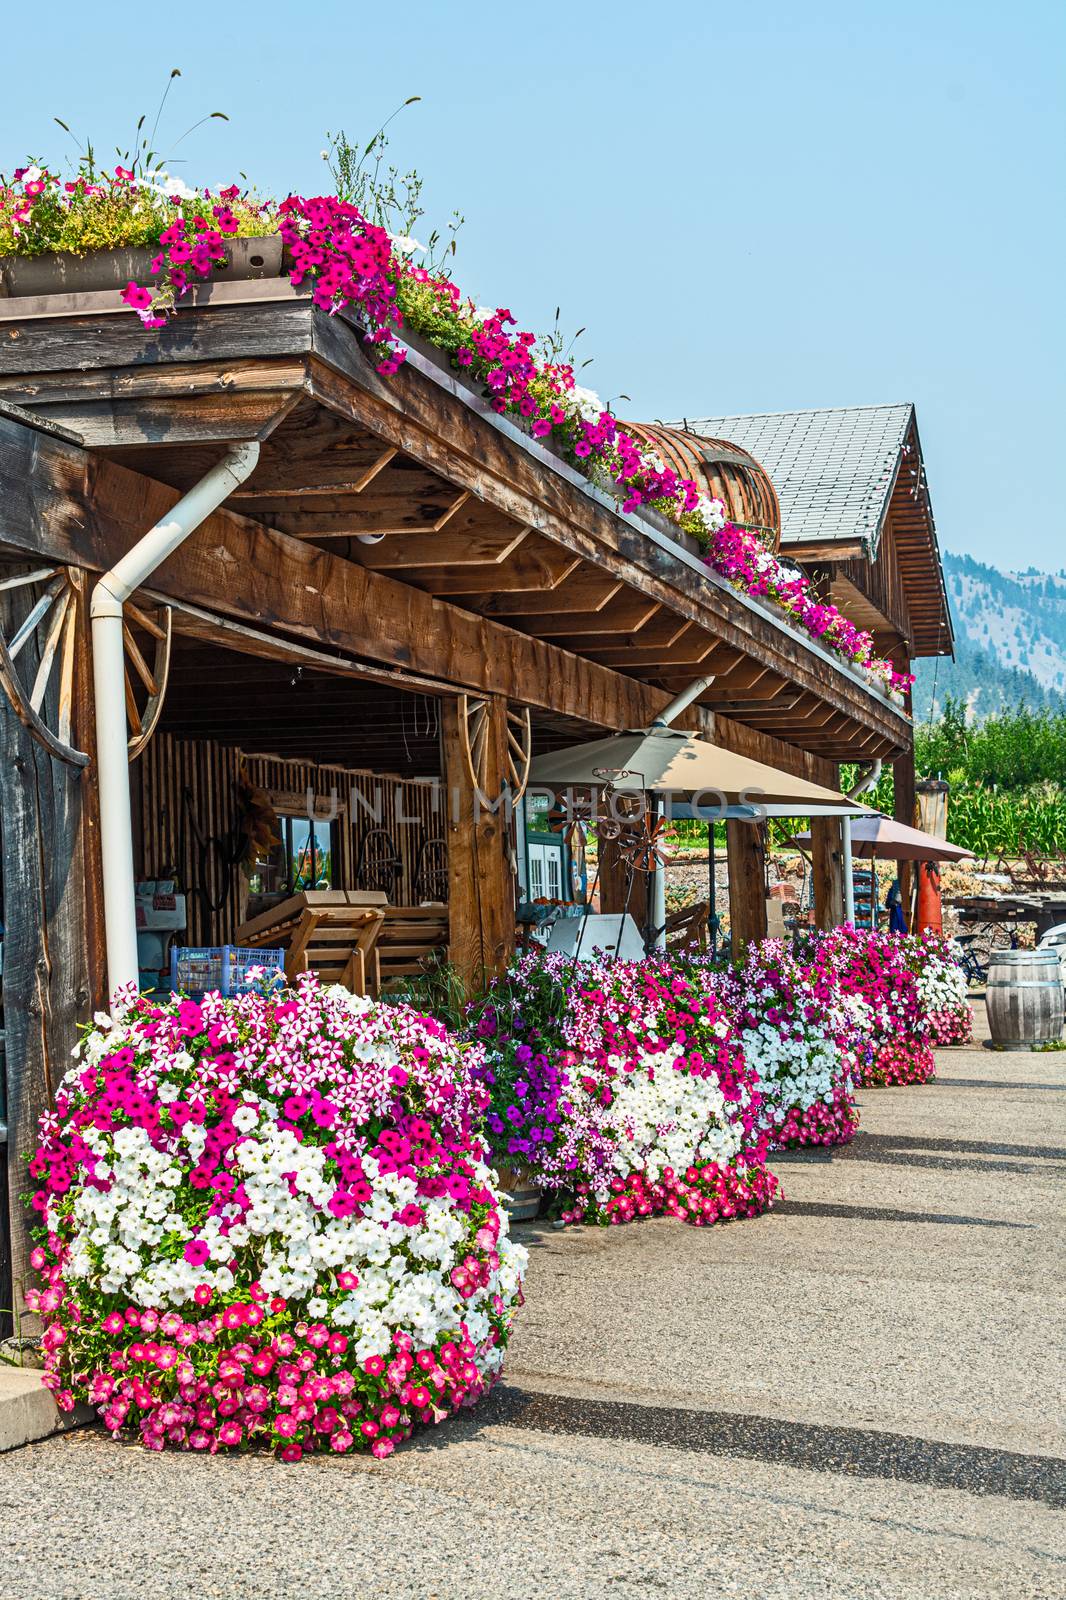 Blossoming flowers in front of a farm shop in Okanagan valley by Imagenet